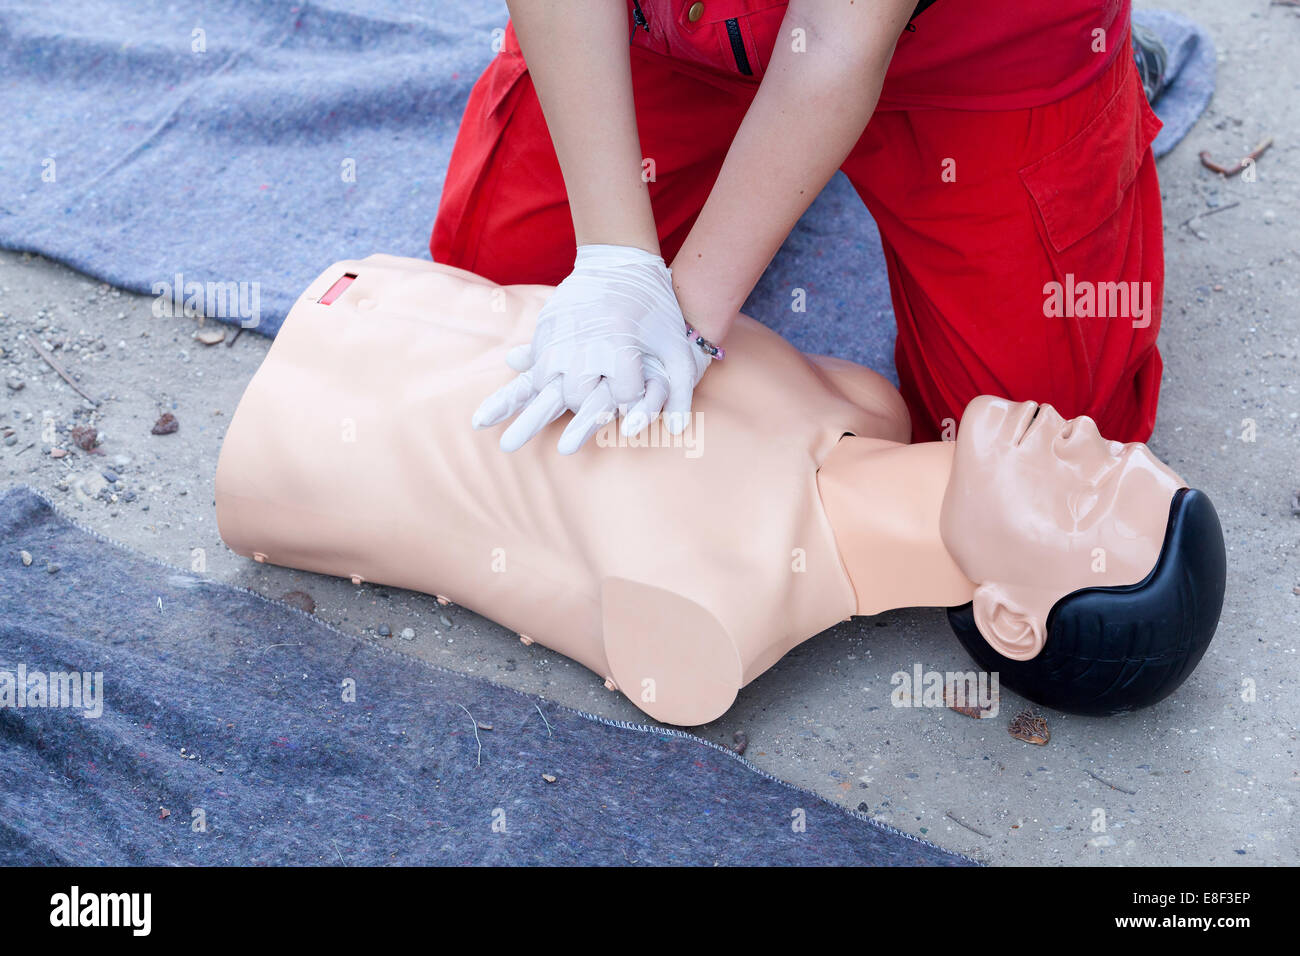 CPR training Stock Photo